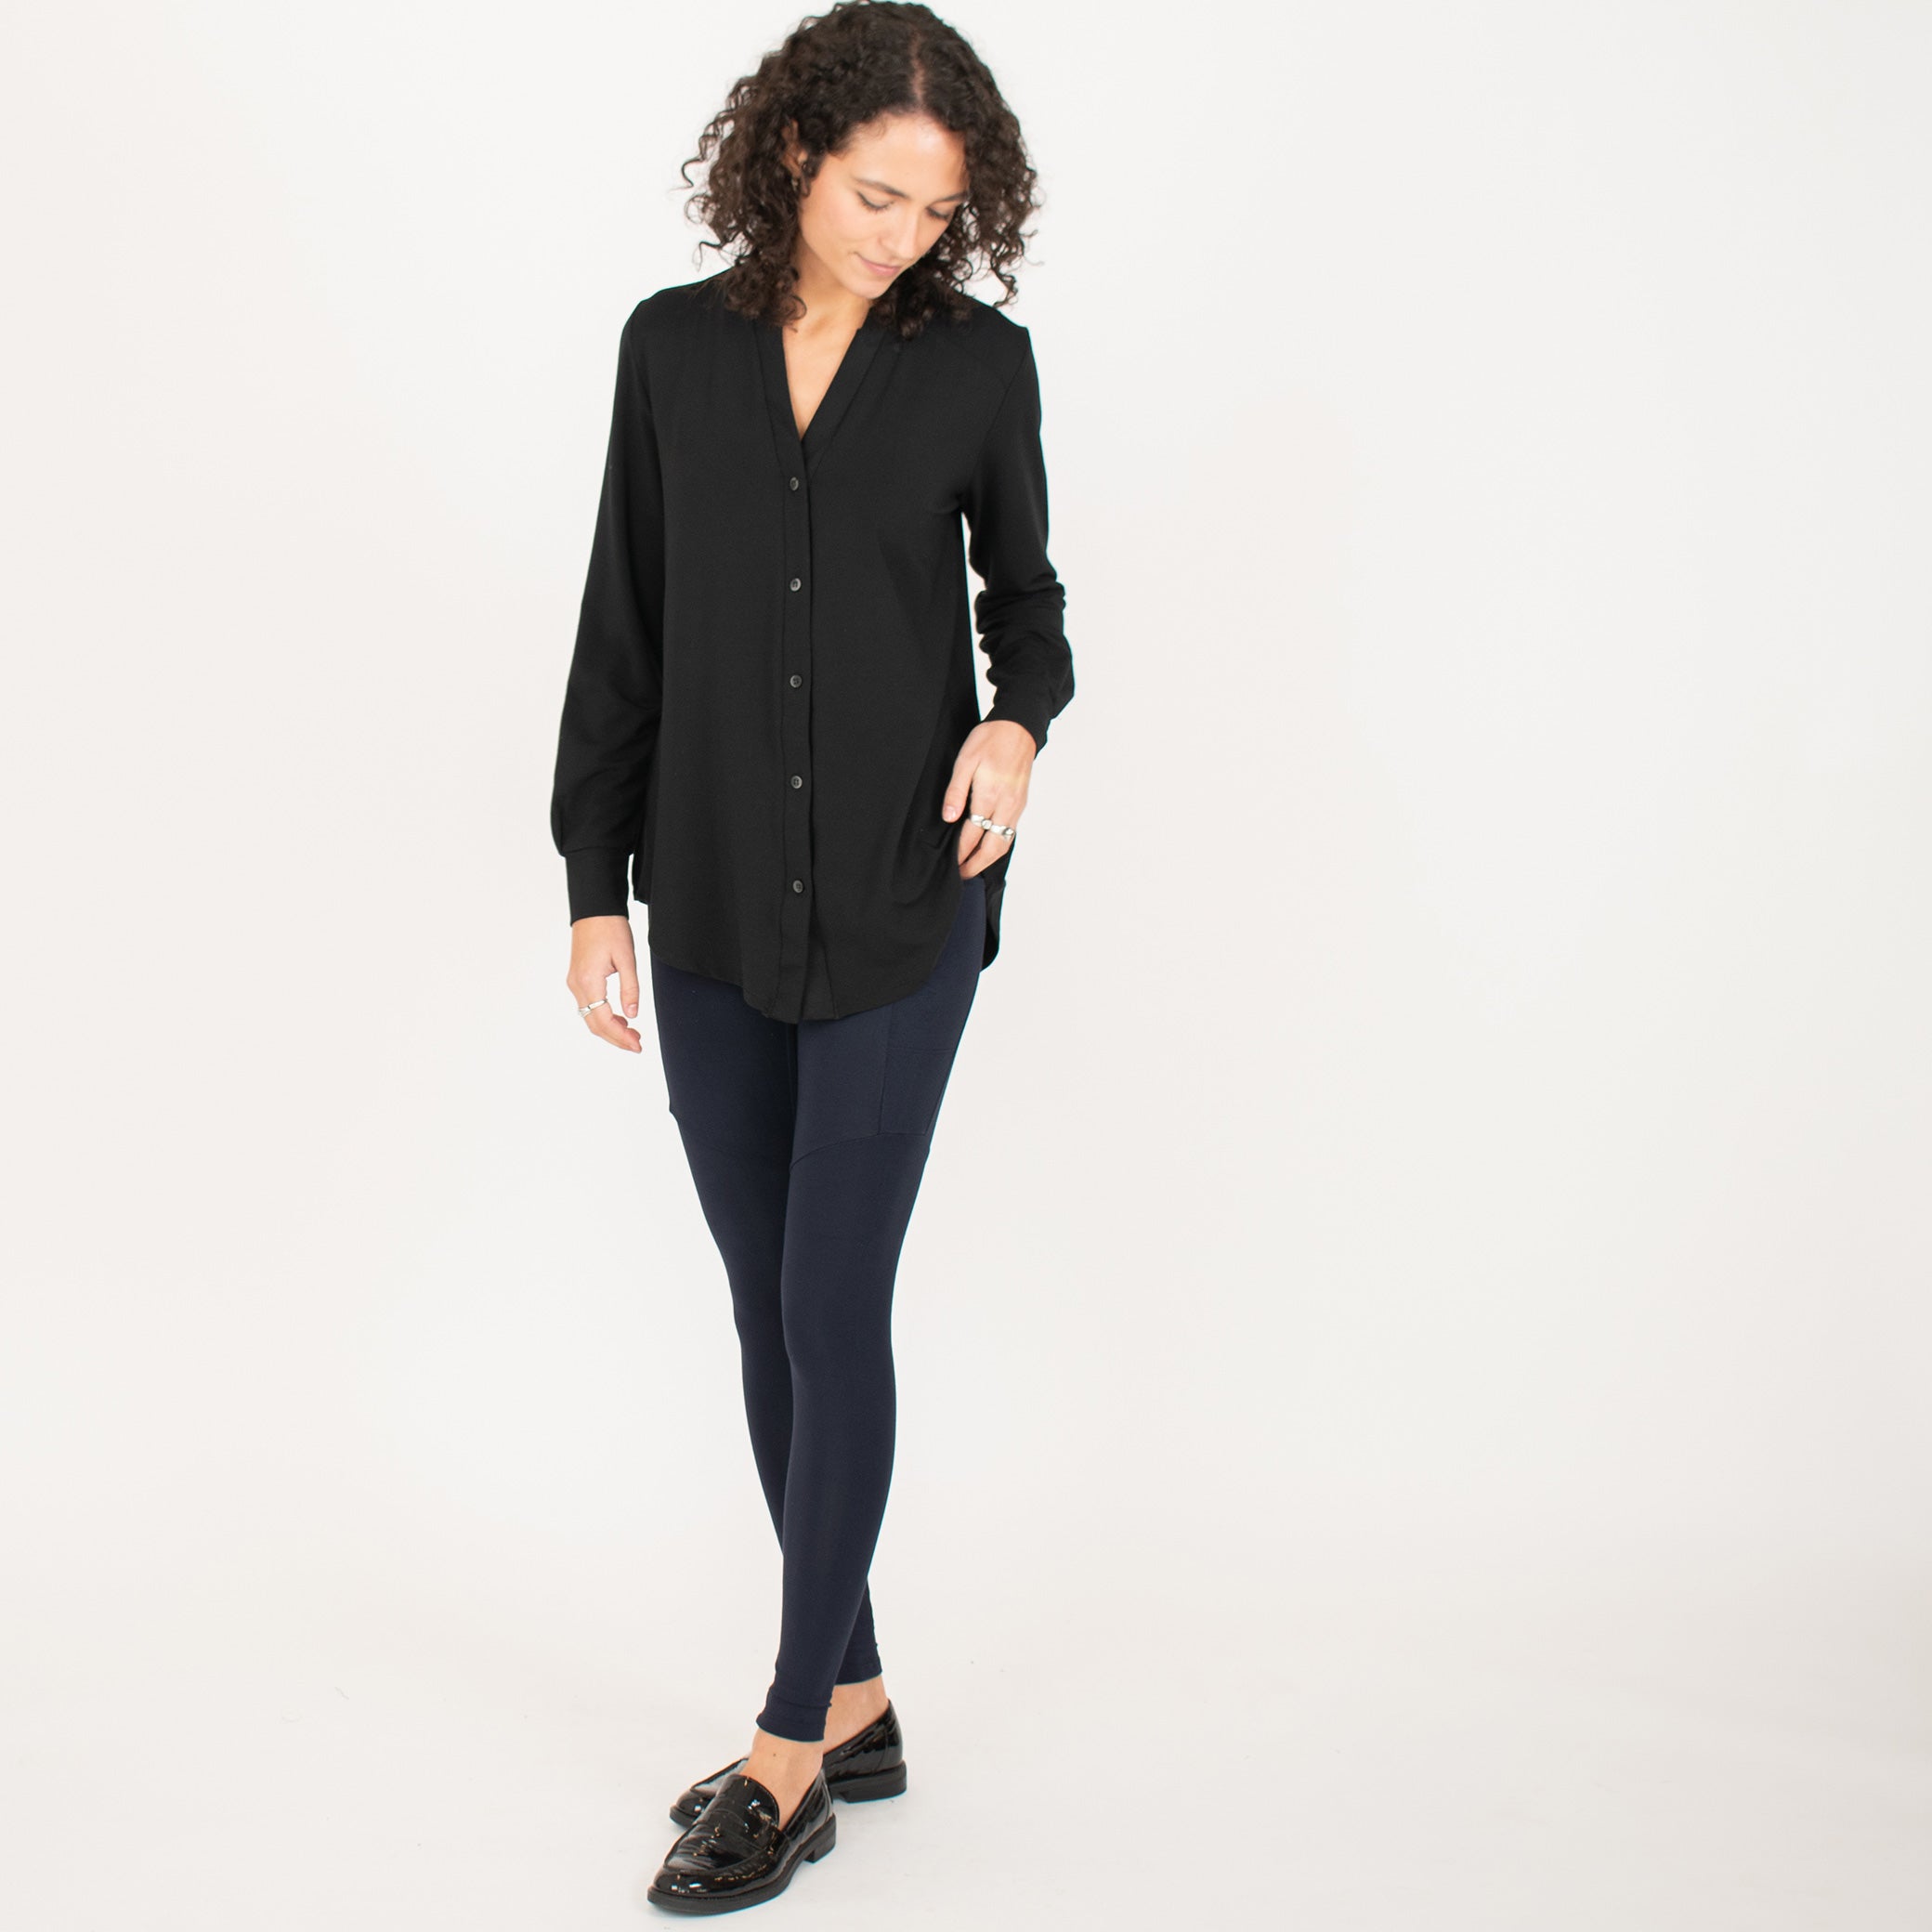 Woman wearing navy blue form fitting stretchy leggings with hip pocket with black button up shirt